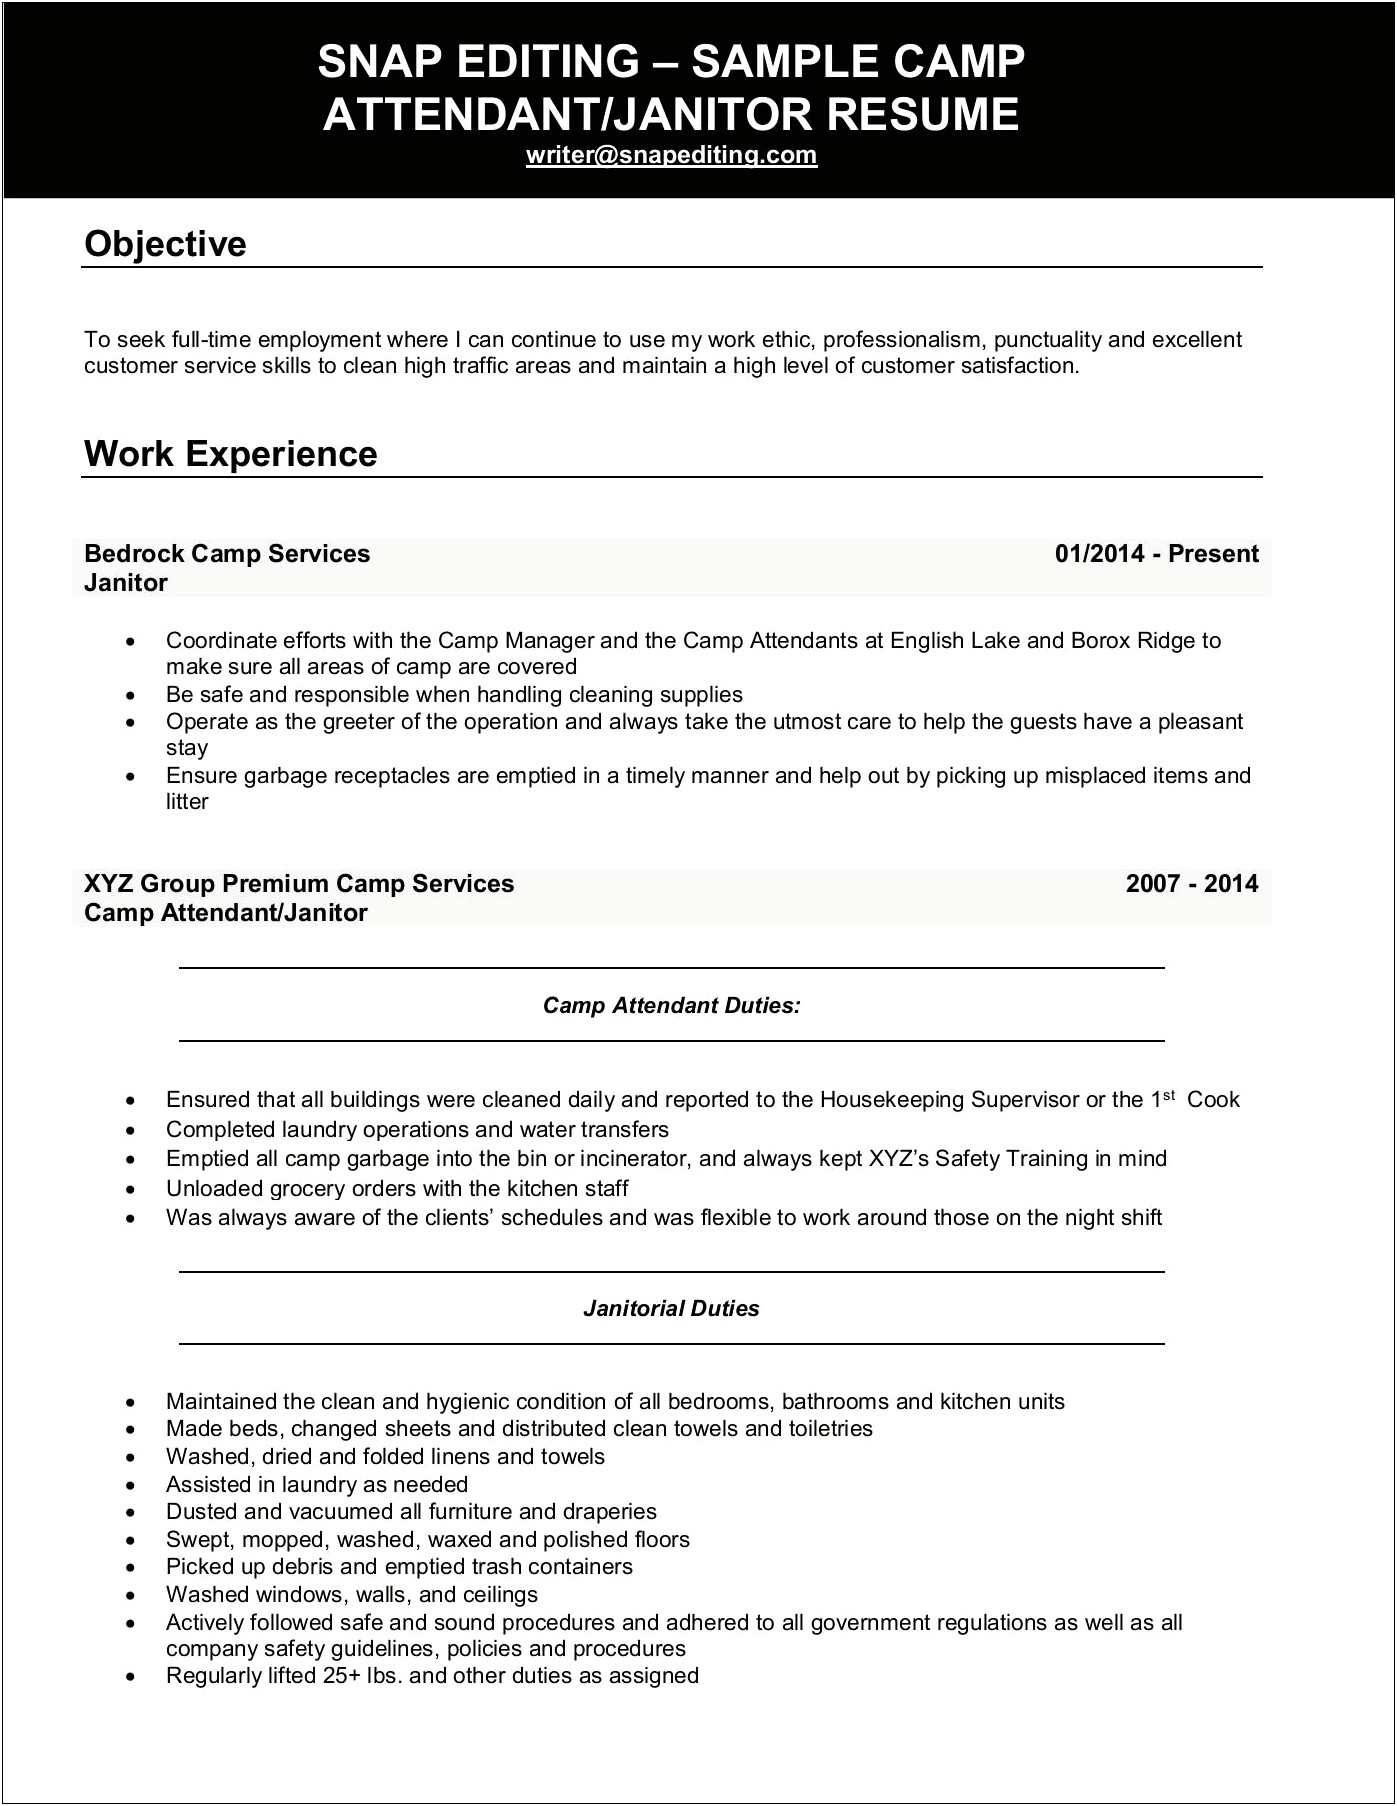 Resume Objective For Laundry Attendant